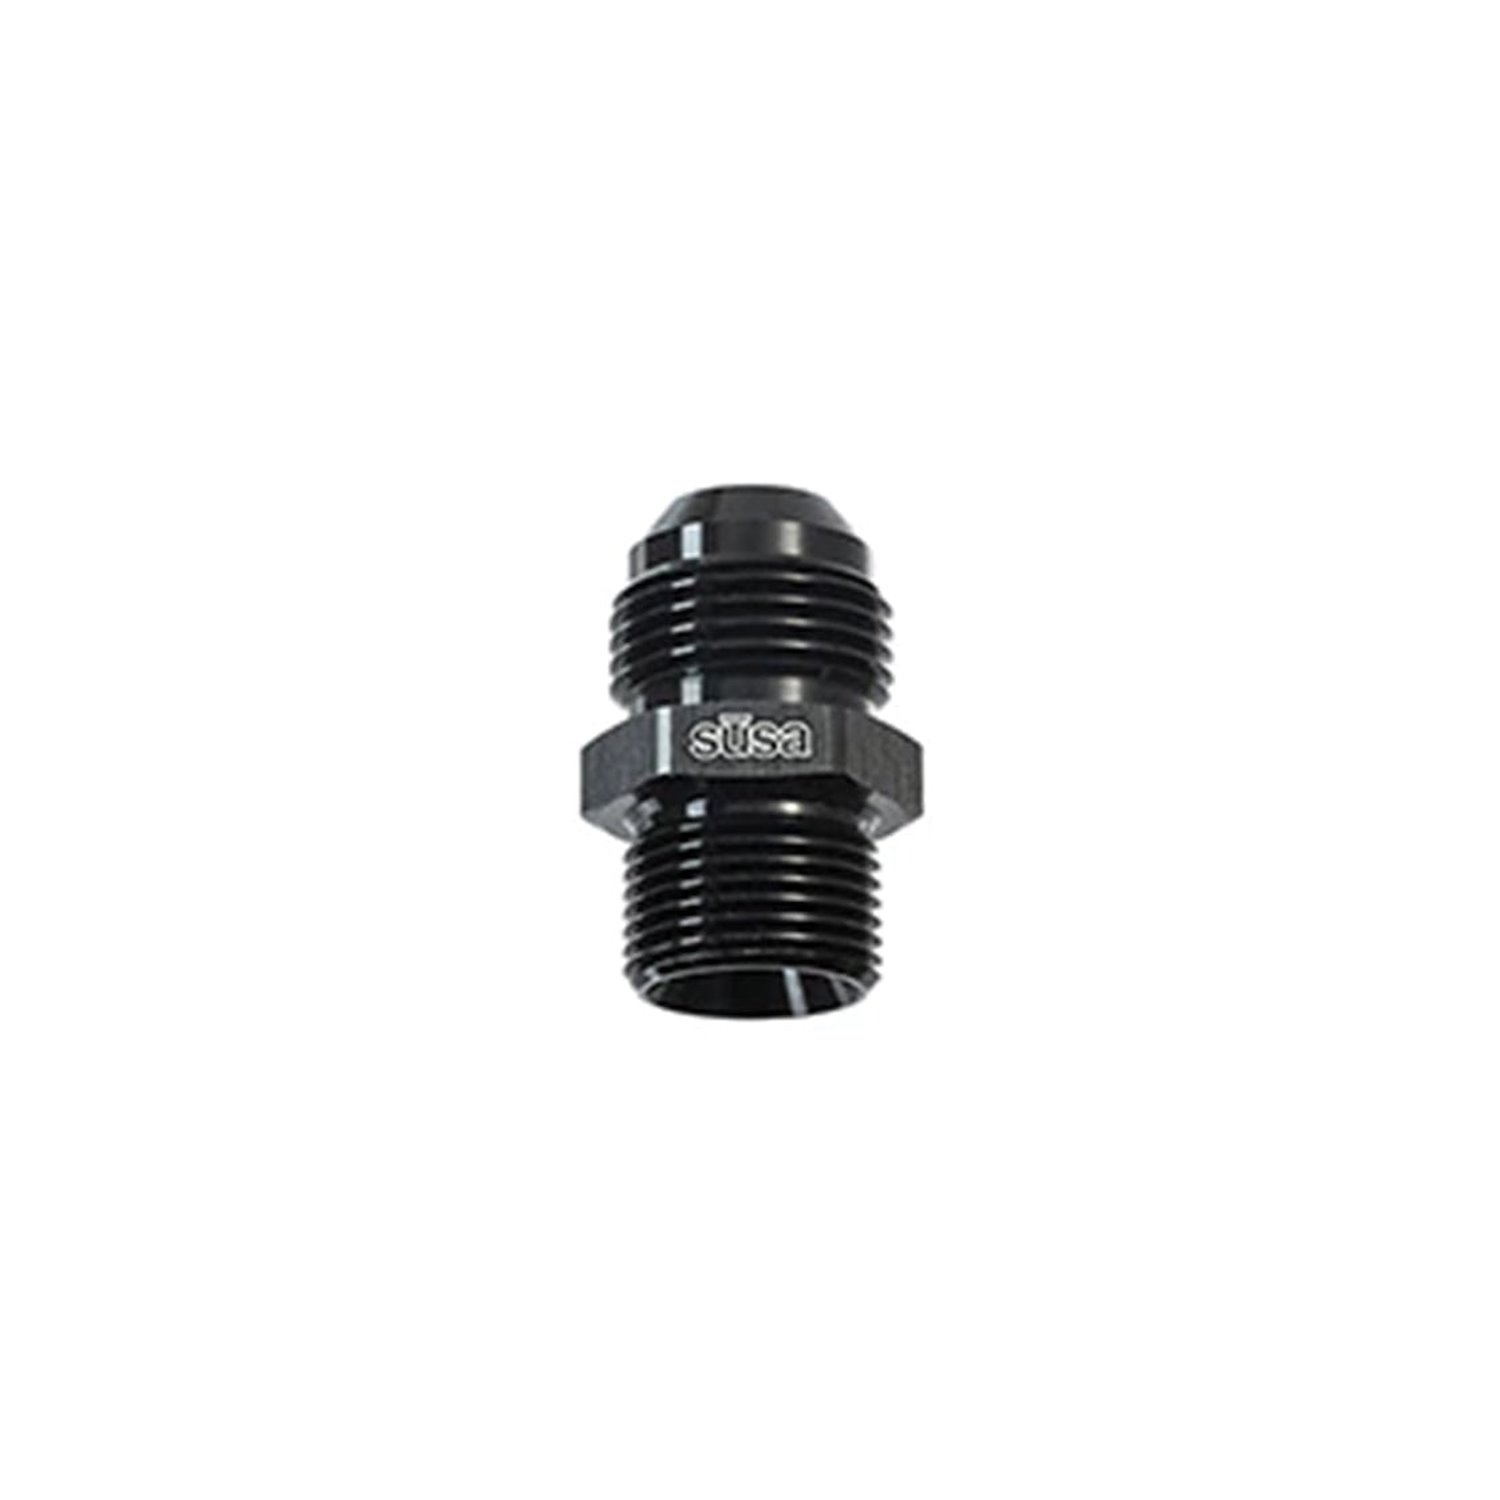 22-M20AN10-00 Adapter Fitting, M20 Male to AN10 Male, Straight